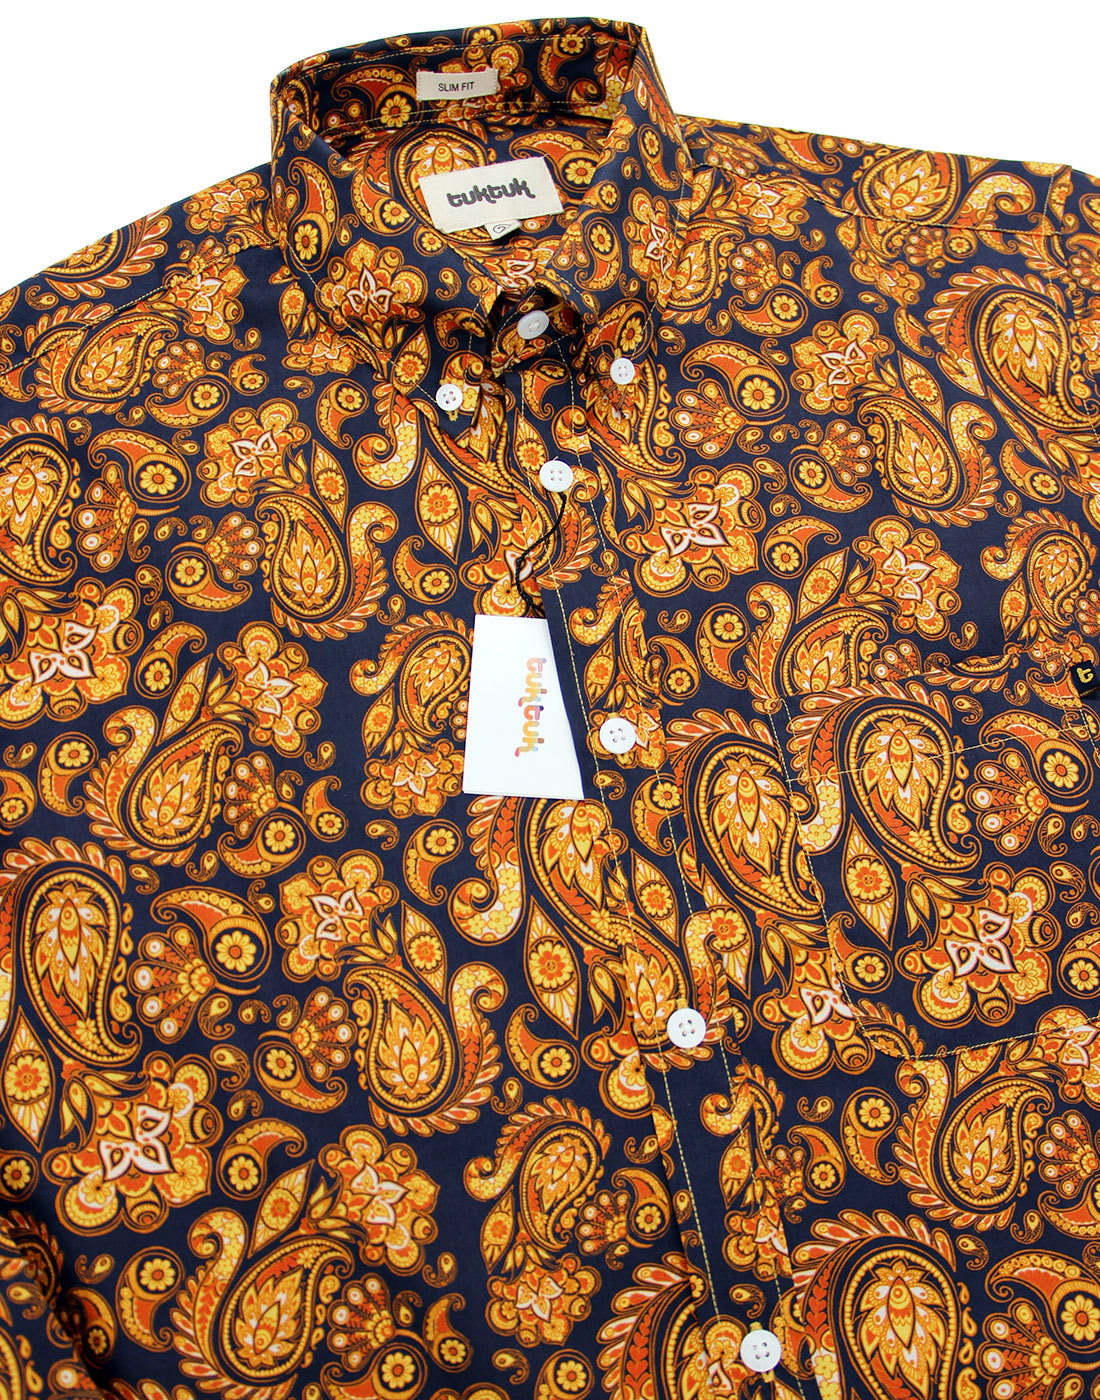 TUKTUK Retro 60s Mod Button Dow Psychedelic Paisley Shirt in Blue